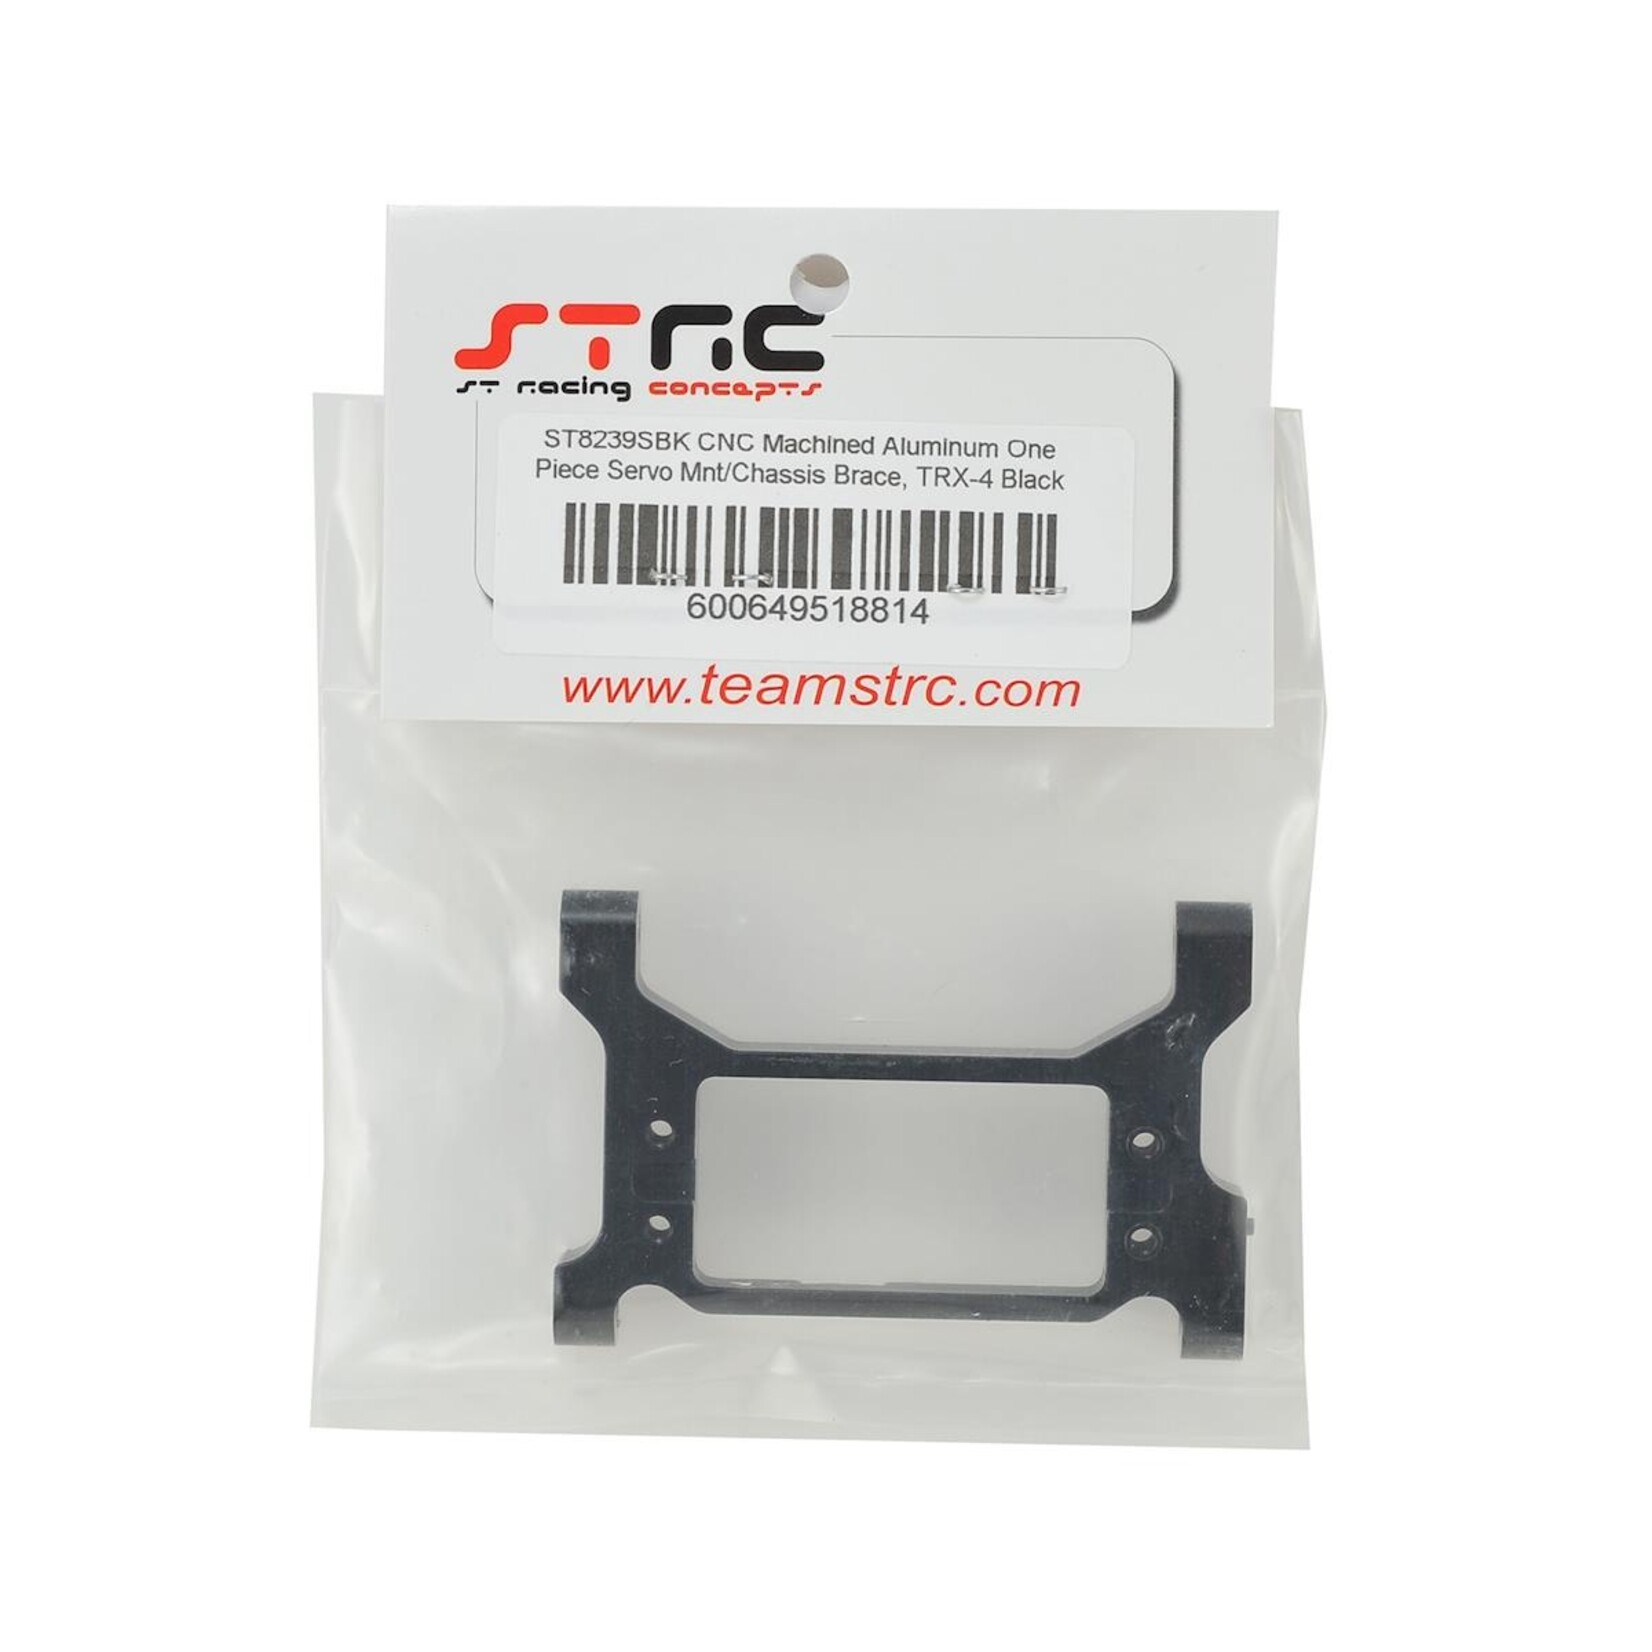 ST Racing Concepts ST Racing Concepts Traxxas TRX-4 One-Piece Servo Mount/Chassis Brace (Black) #ST8239SBK